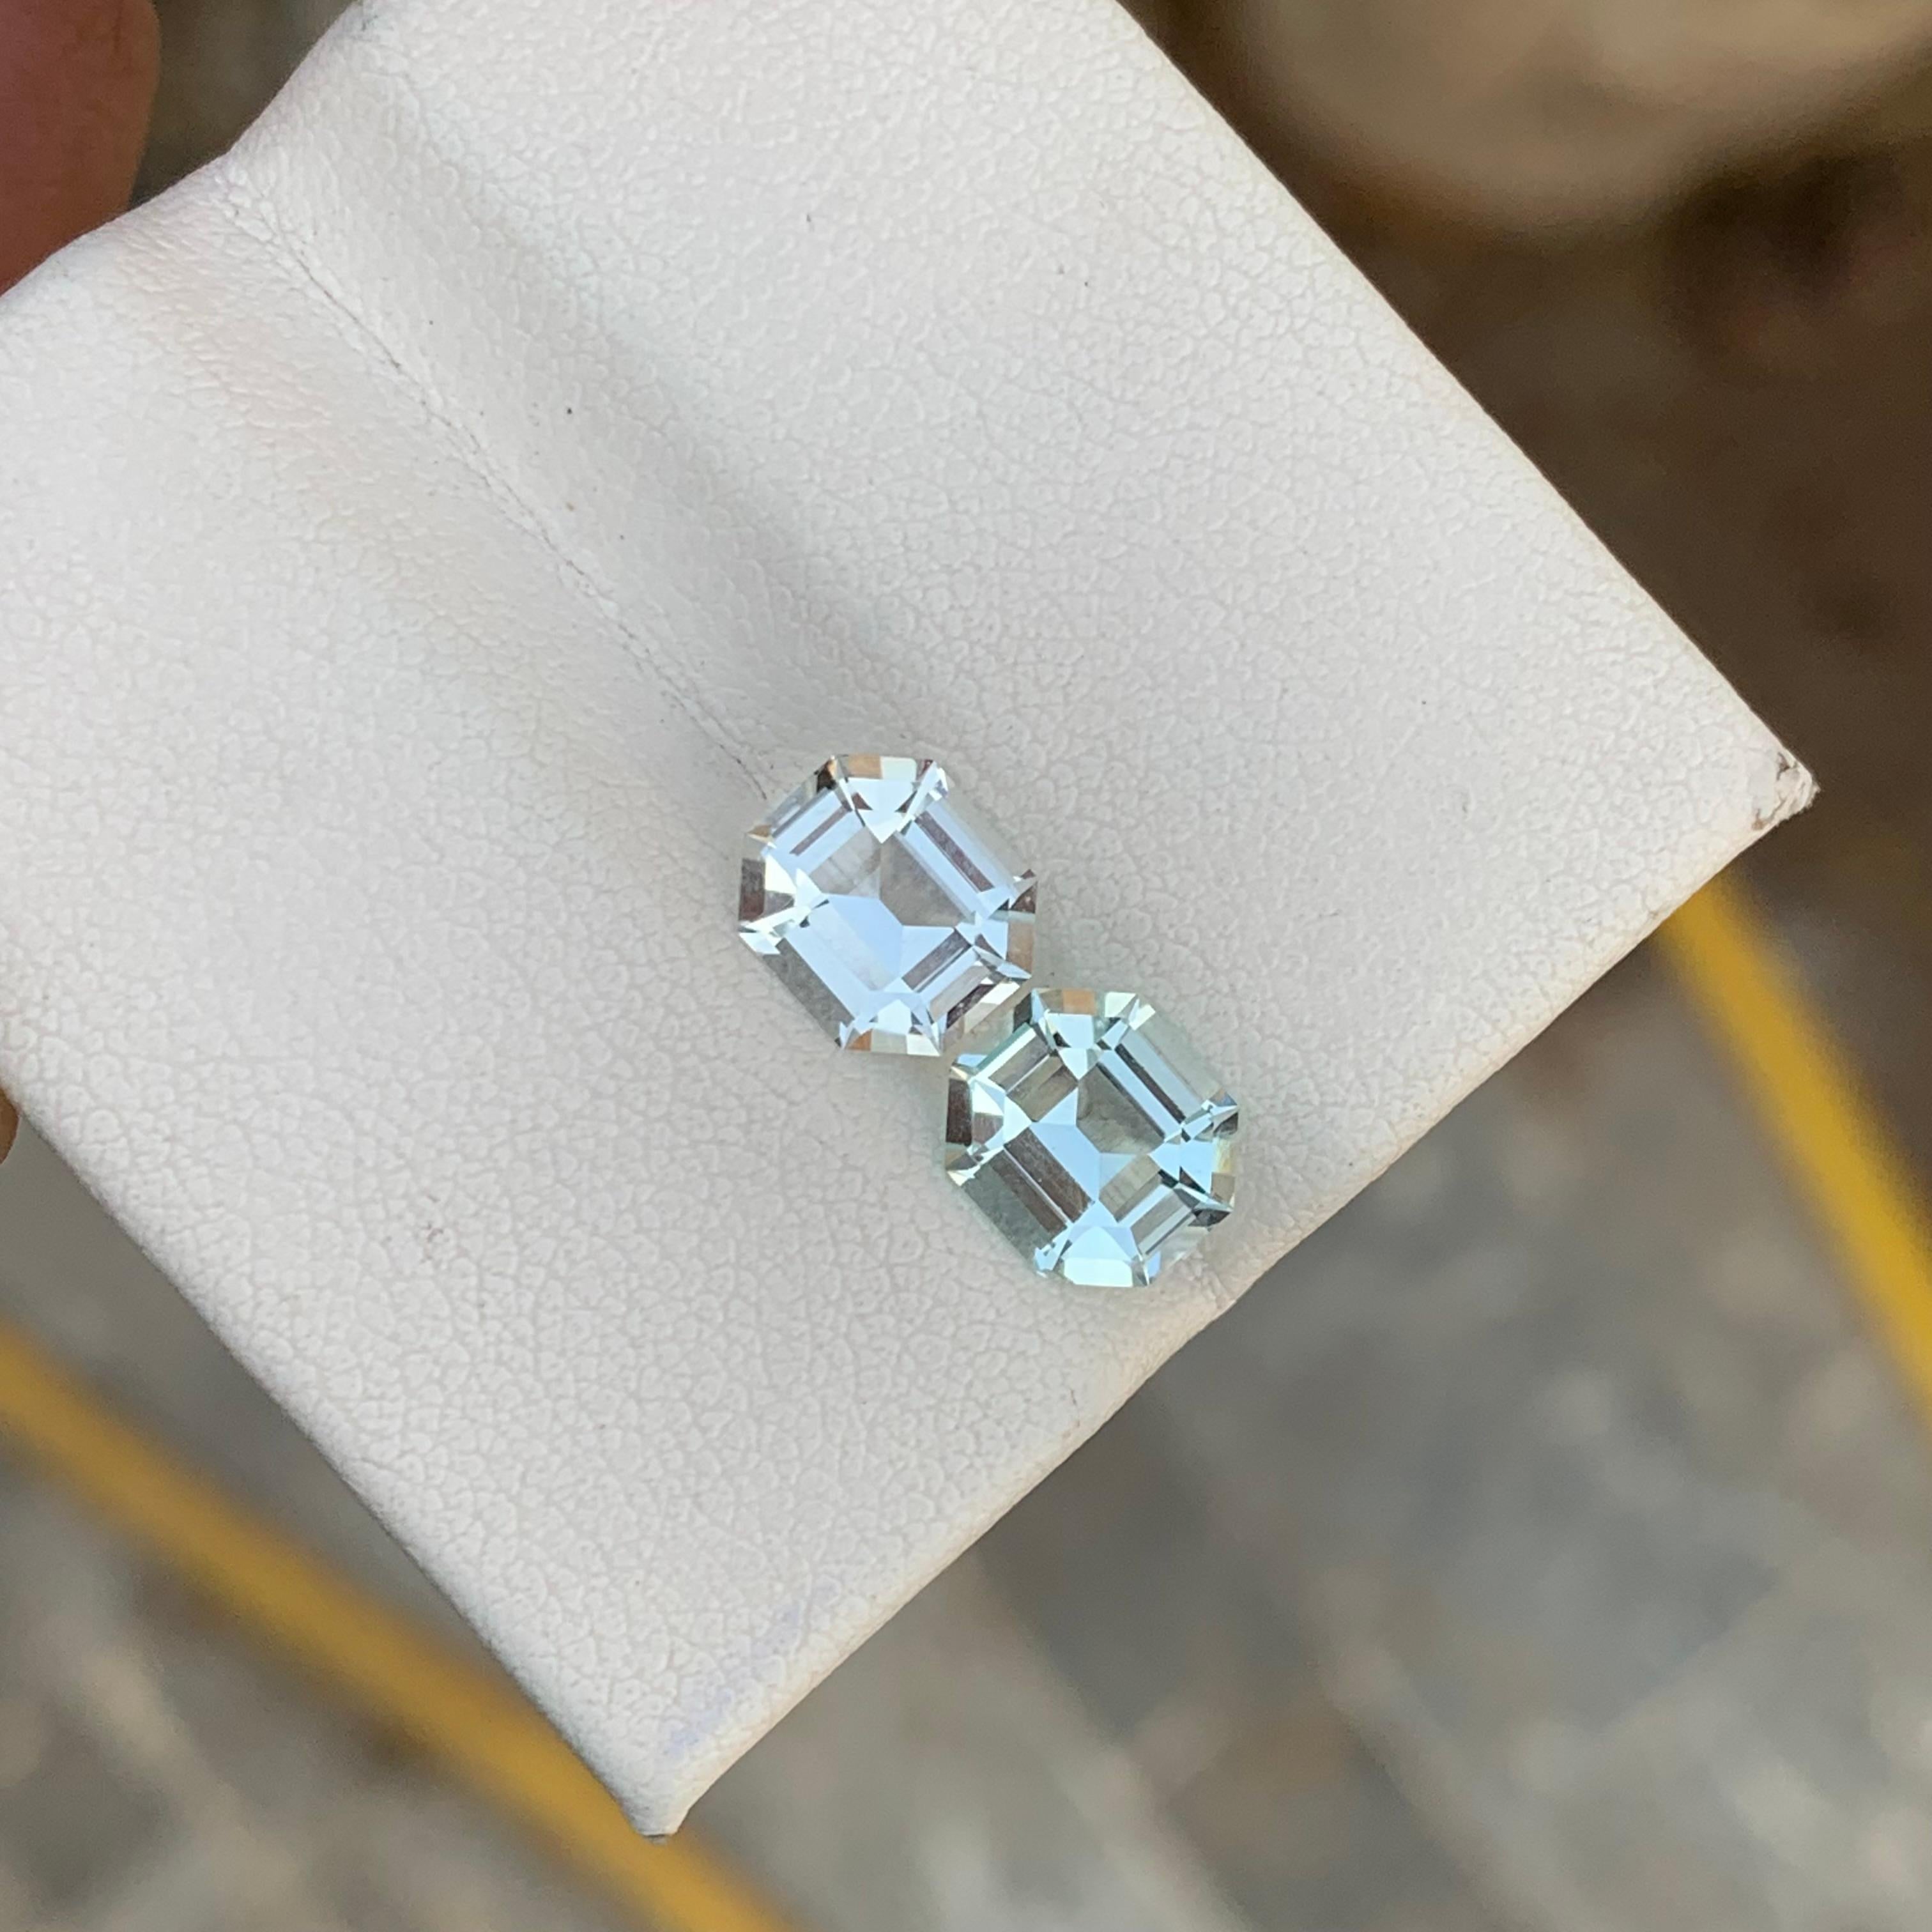 Gorgeous Natural Loose Aquamarine Pair For Earrings Jewelry 3.05 Carats  7